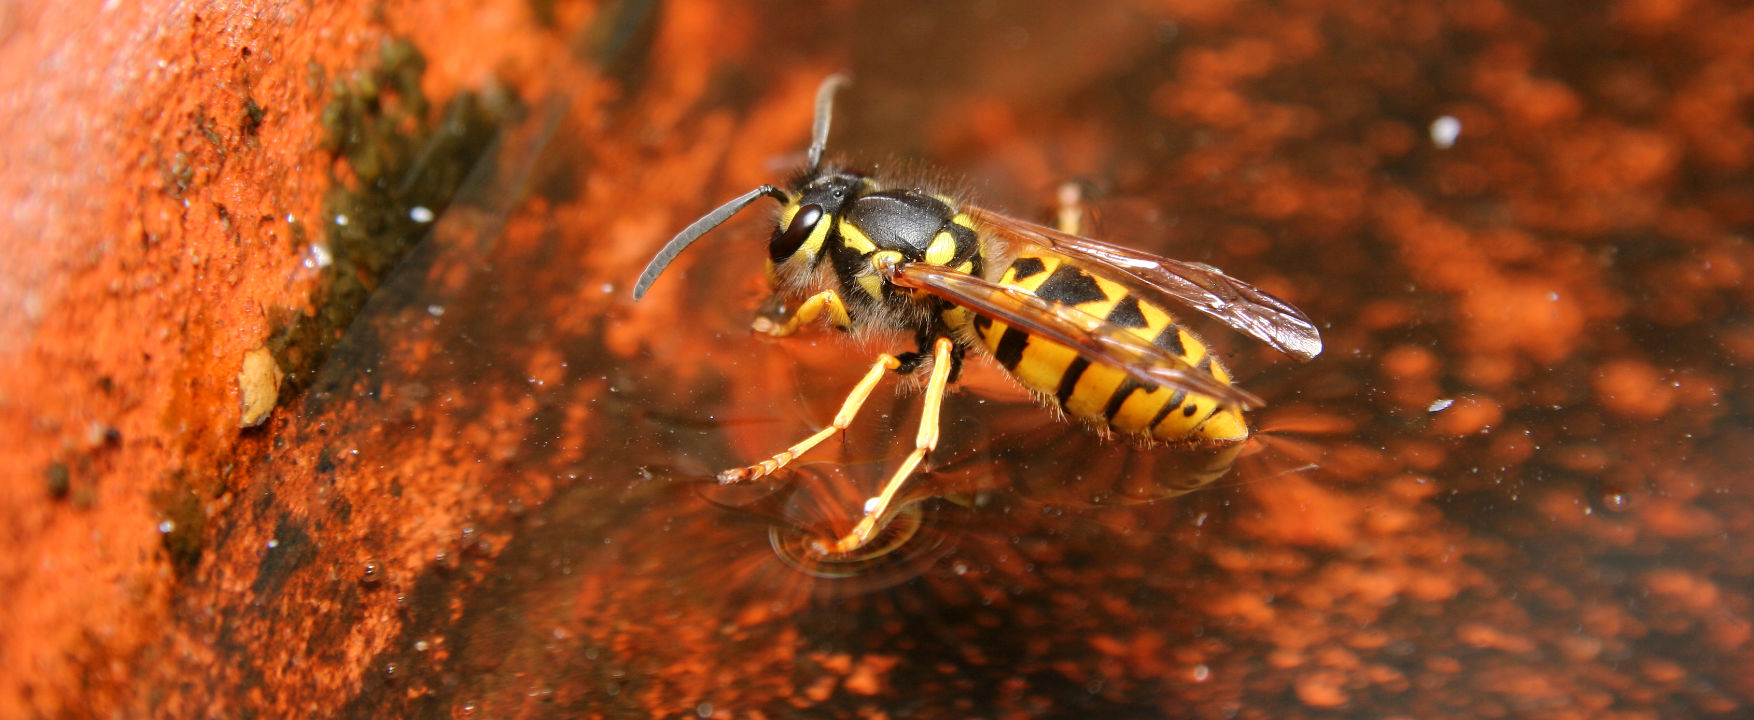 European wasp removal adelaide